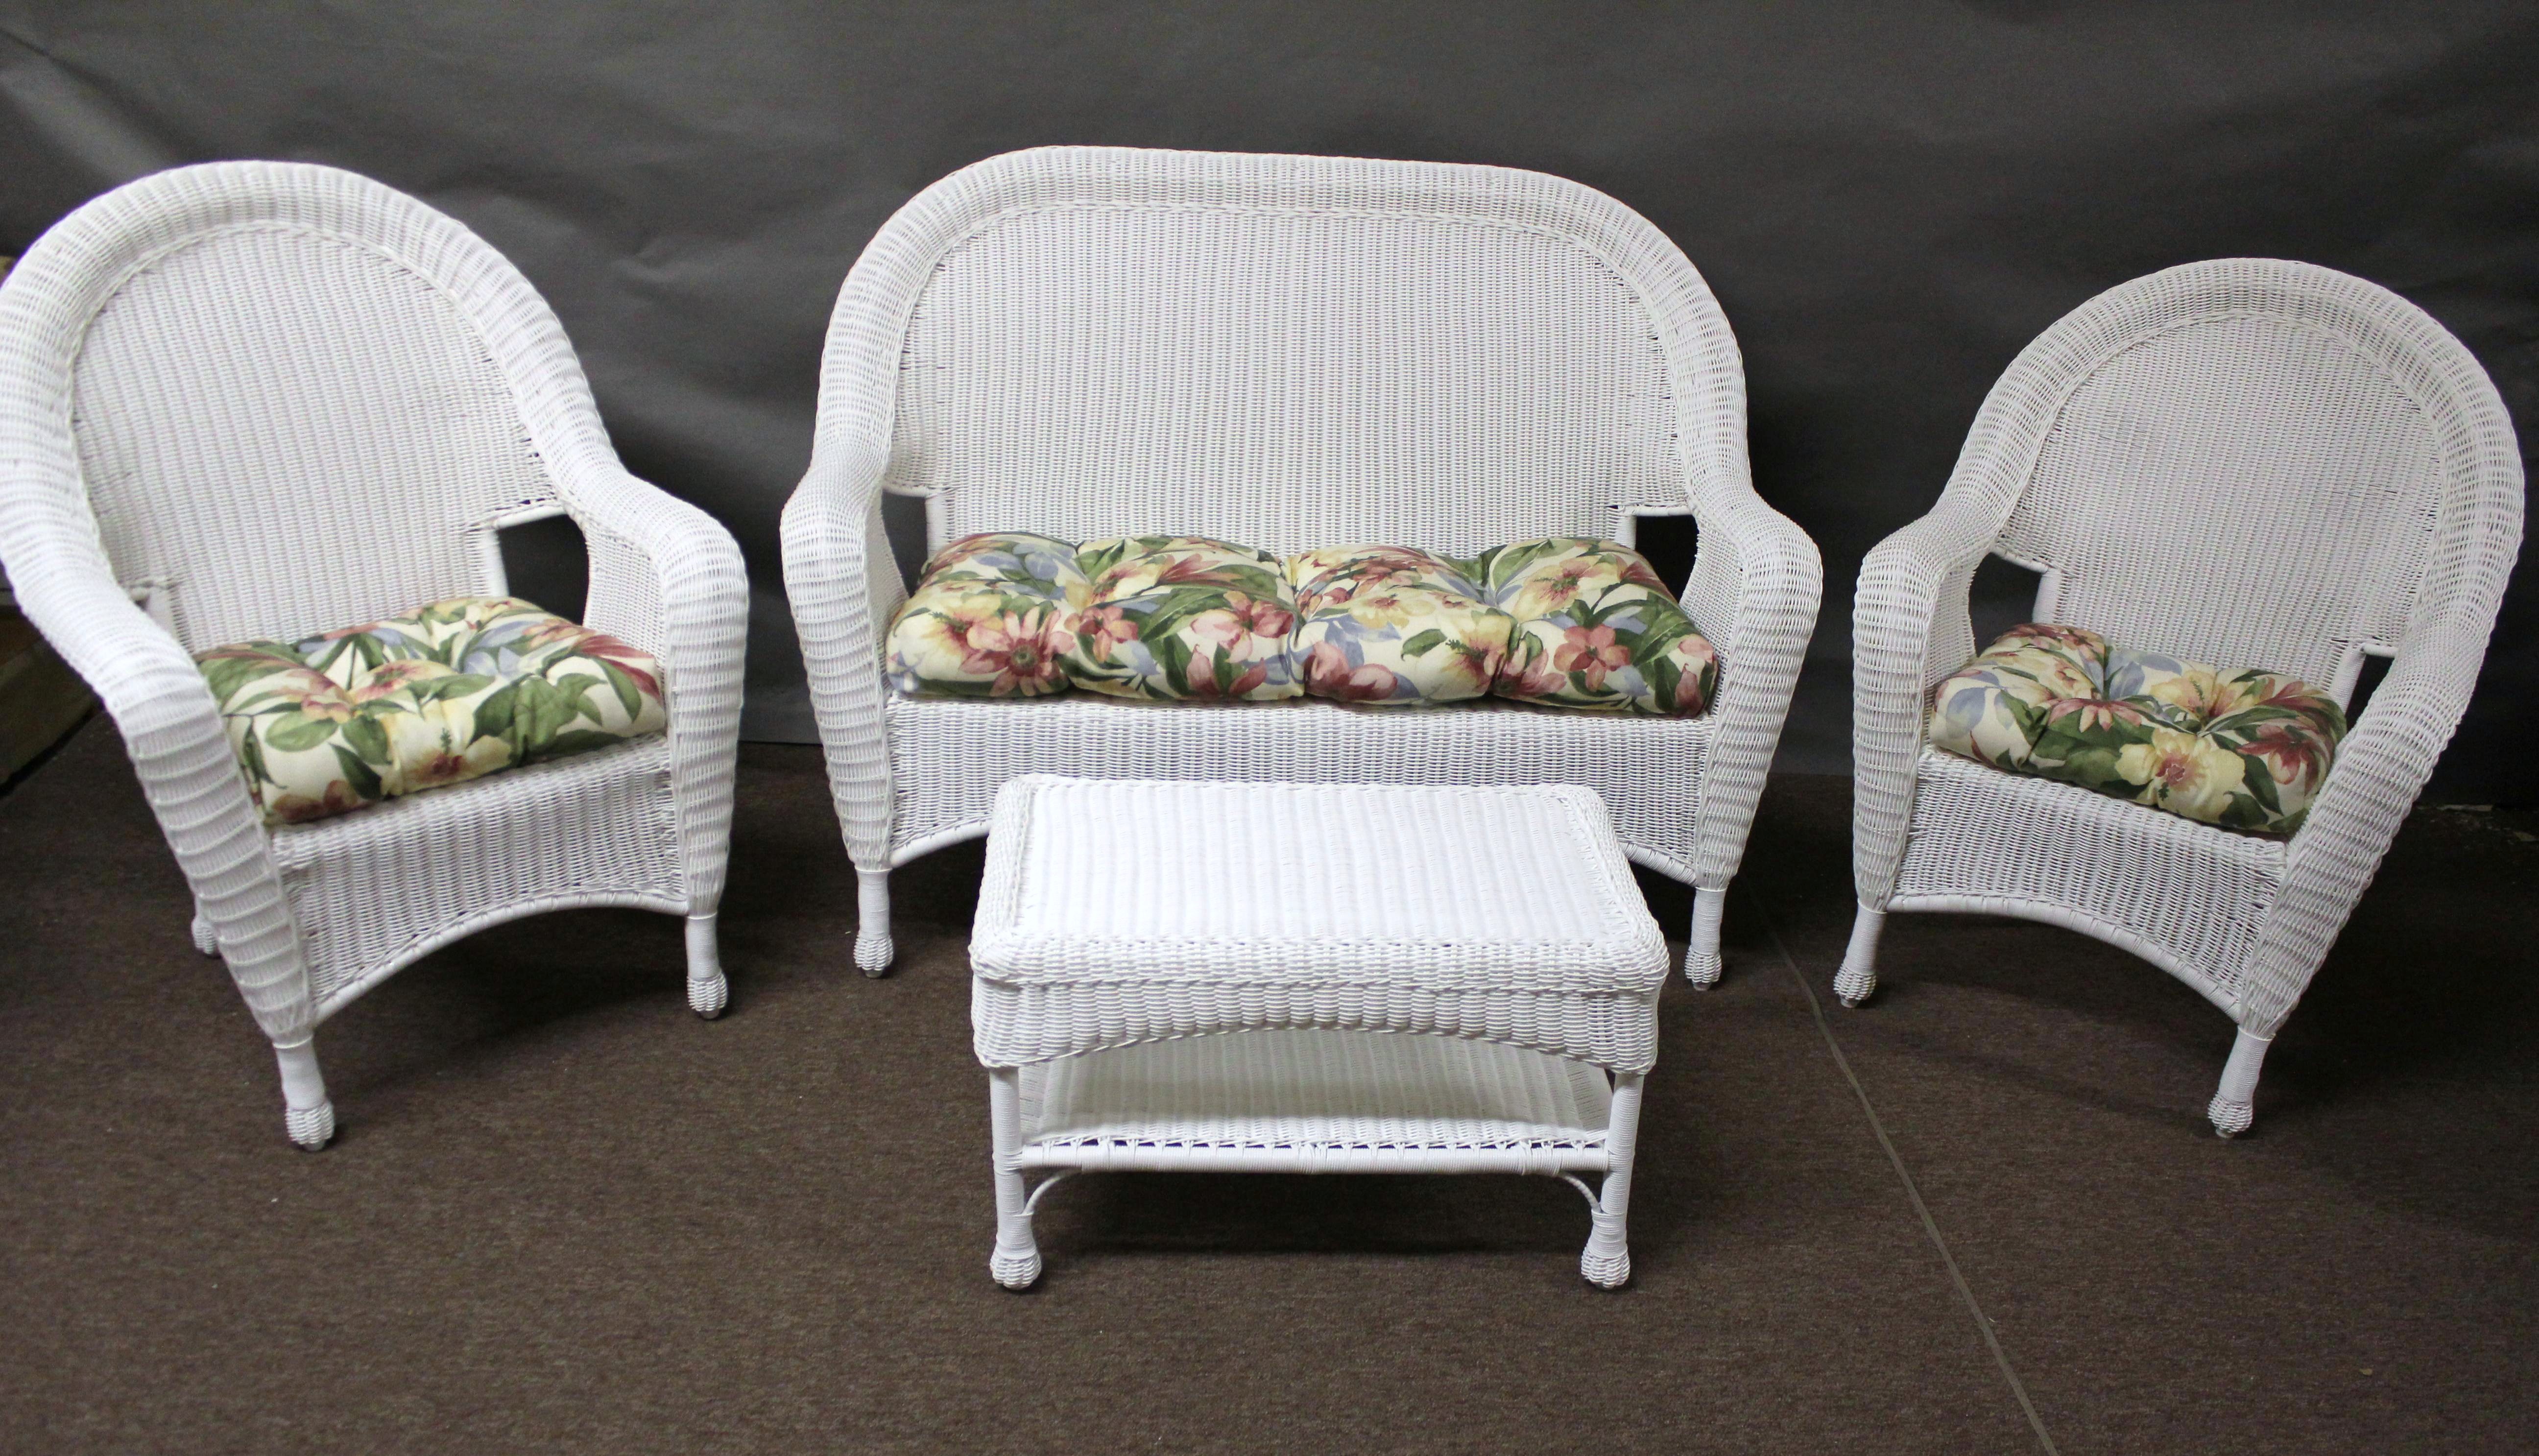 Riviera Outdoor Wicker Collection